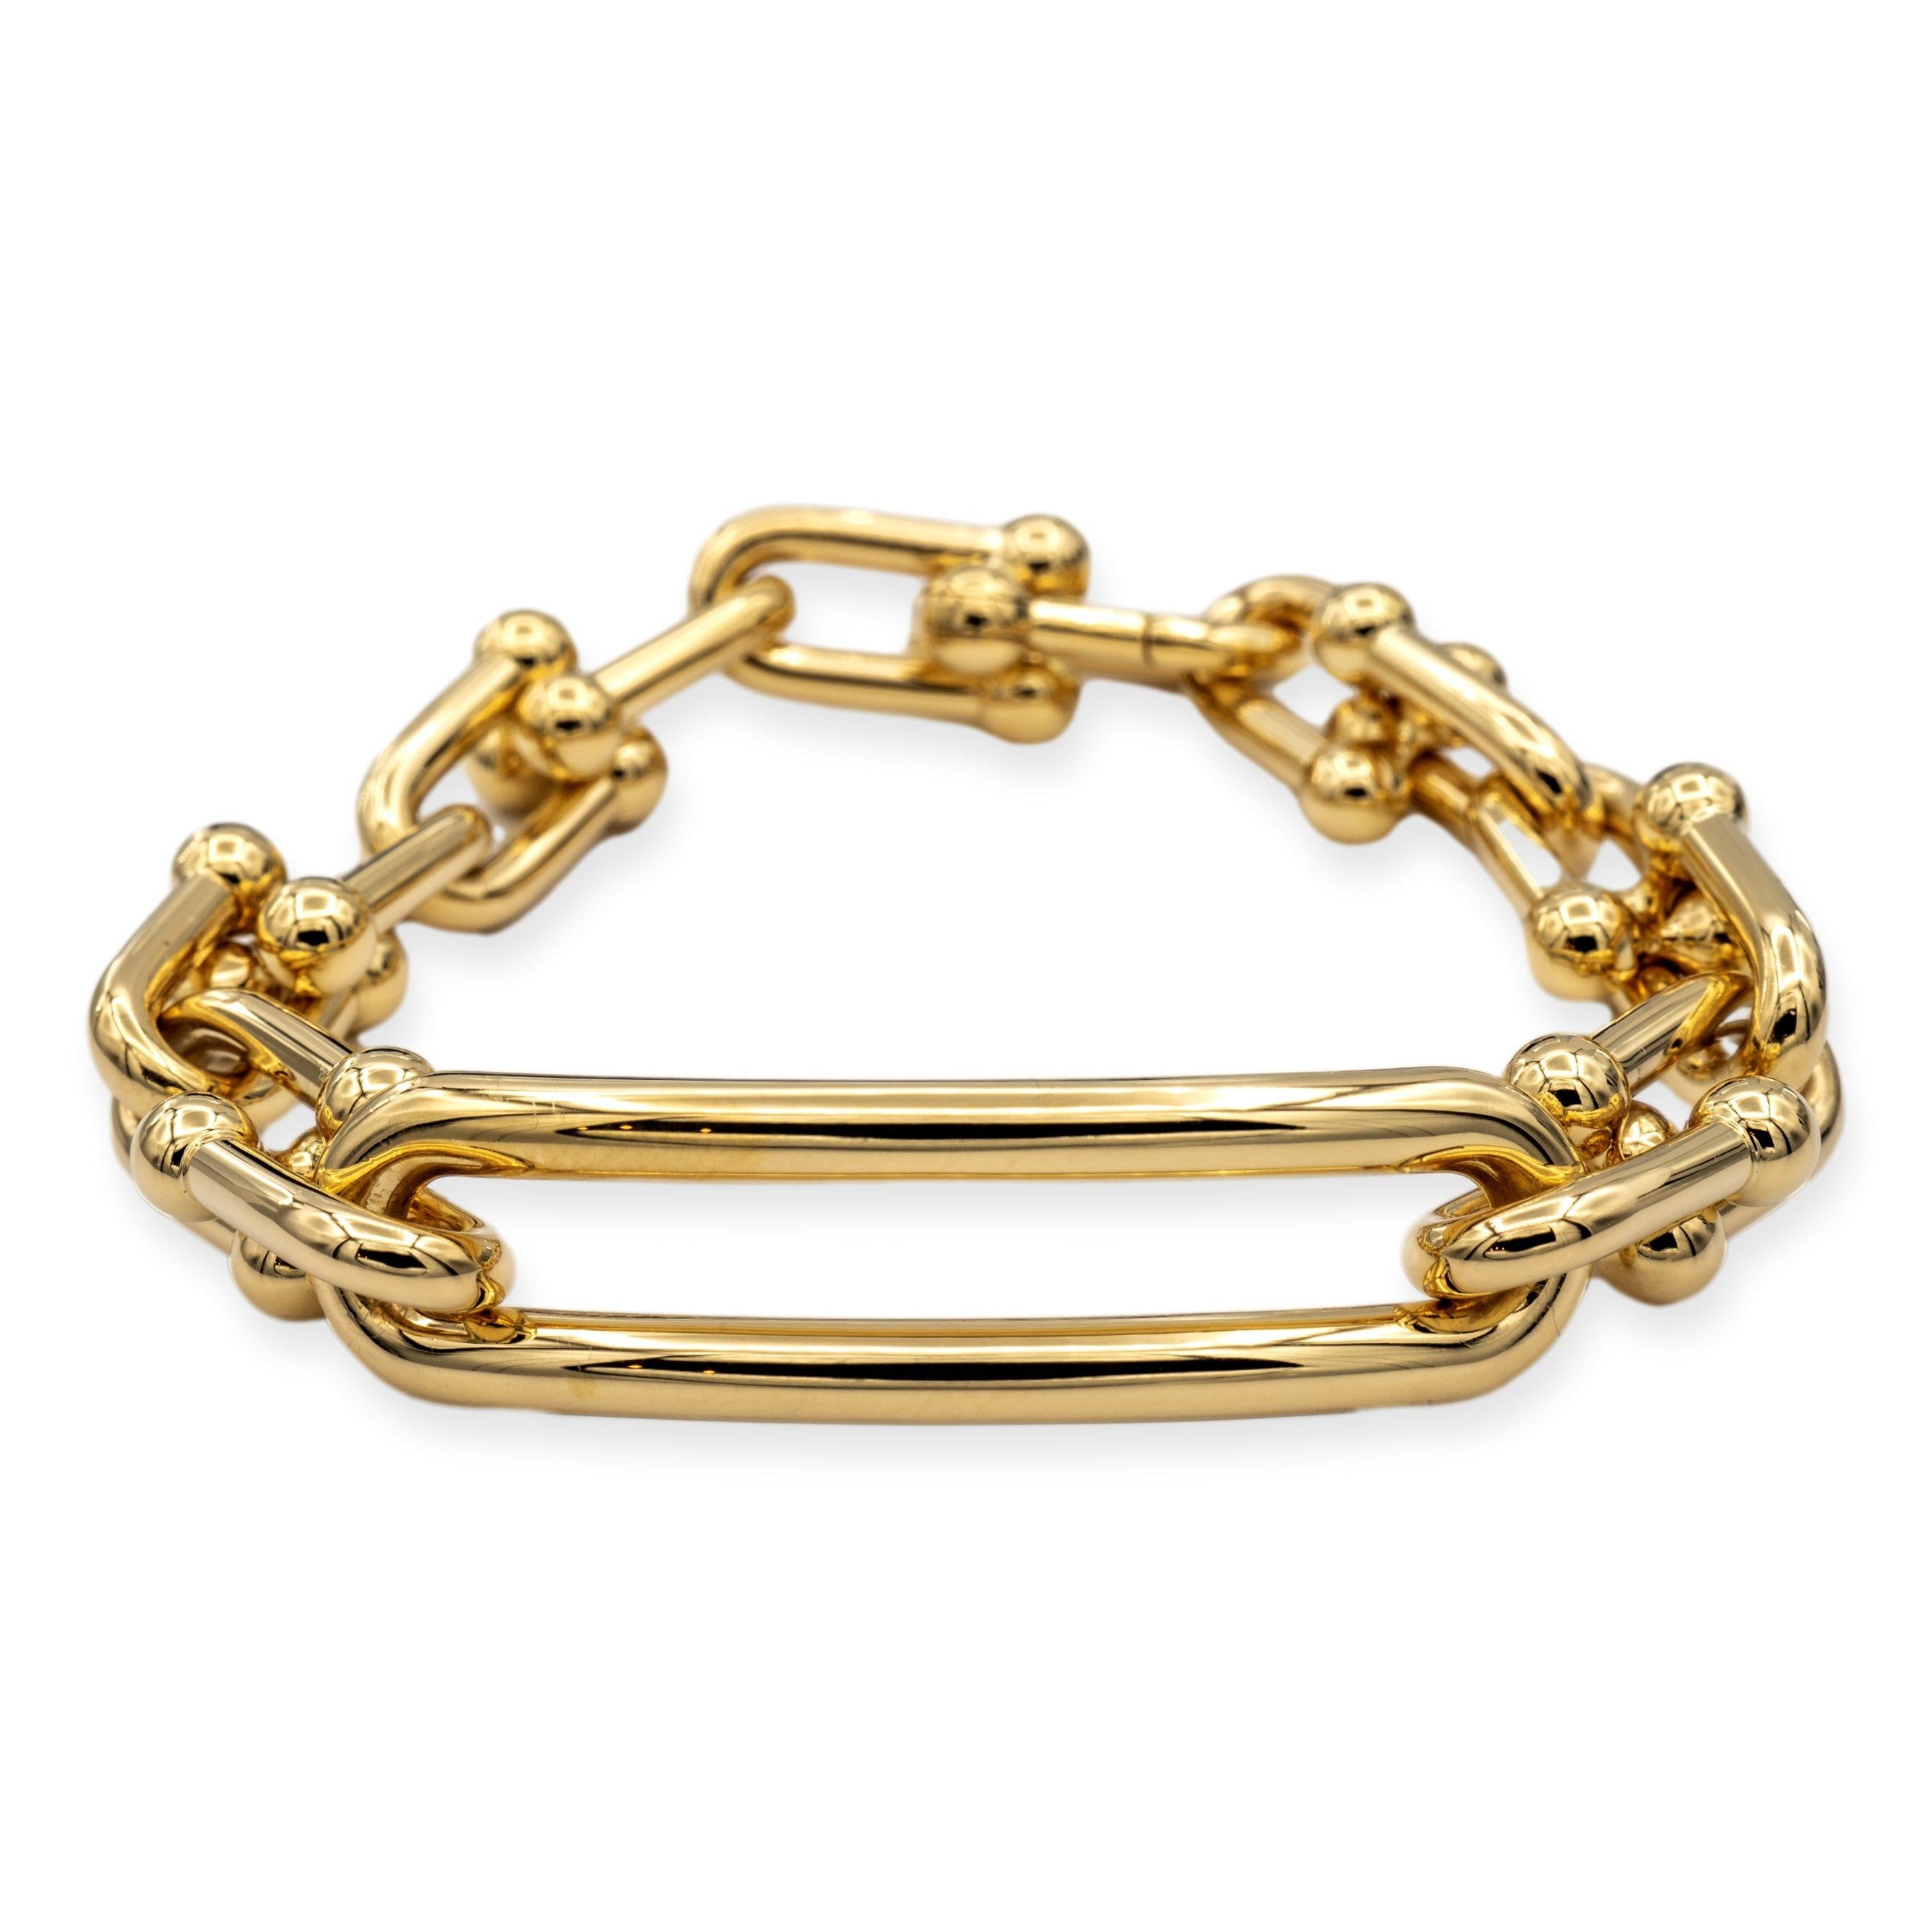 Tiffany & Co. Medium interlocking link bracelet from the Hardwear collection representing a bold and contemporary style that embodies modern sophistication, finely crafted in 18 Karat Yellow Gold weighing 20 grams and measuring 6.75